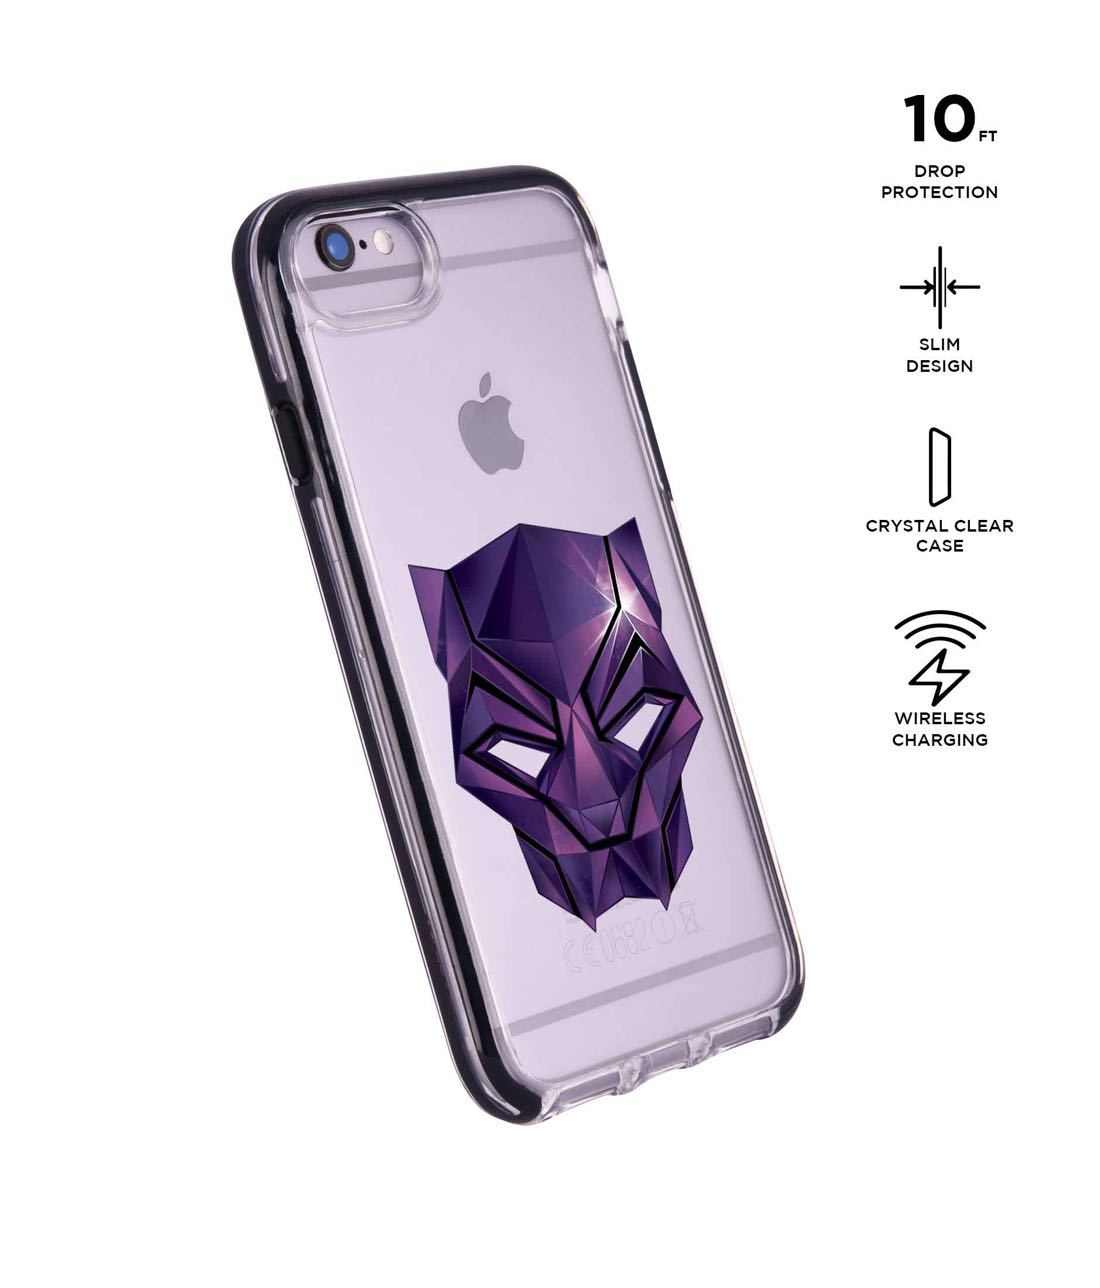 Black Panther Logo - Extreme Phone Case for iPhone 6S